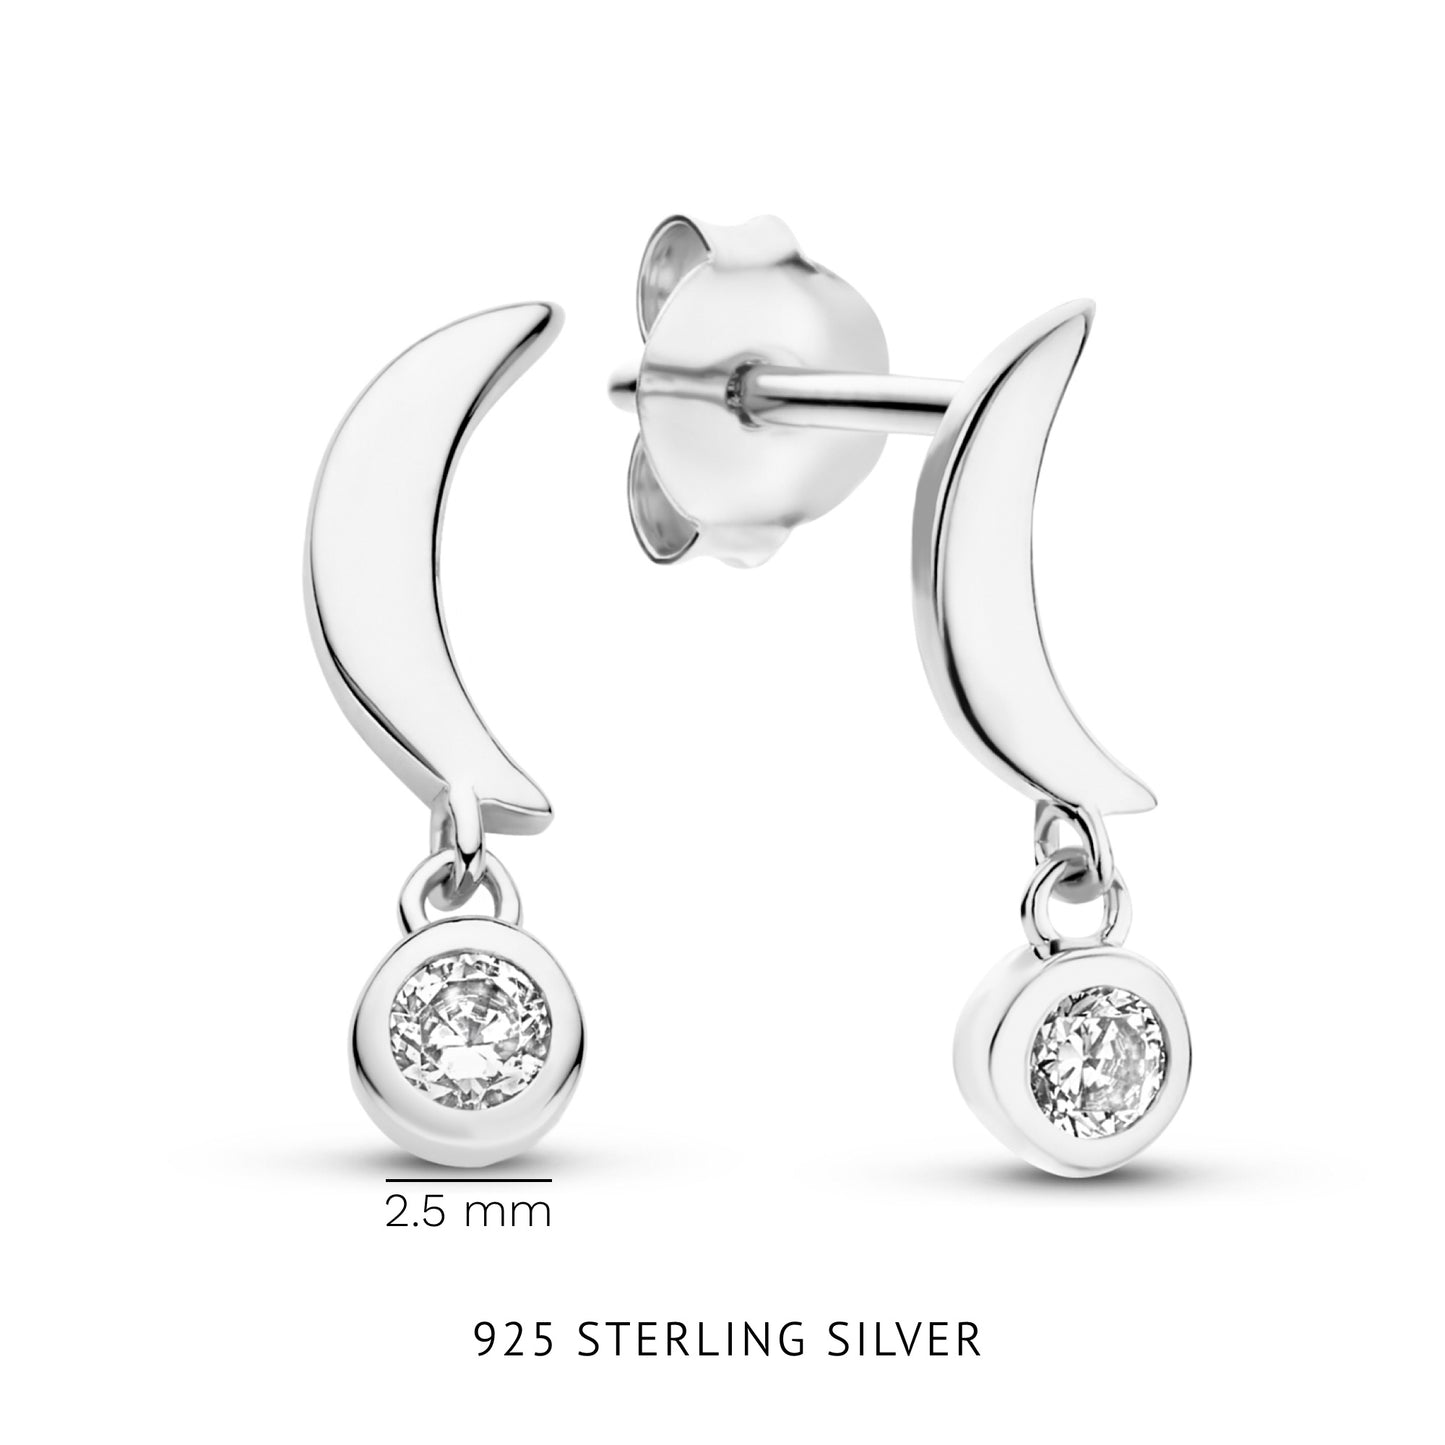 Violet's Gift 925 sterling silver bracelet and ear studs gift set with zirconia stones